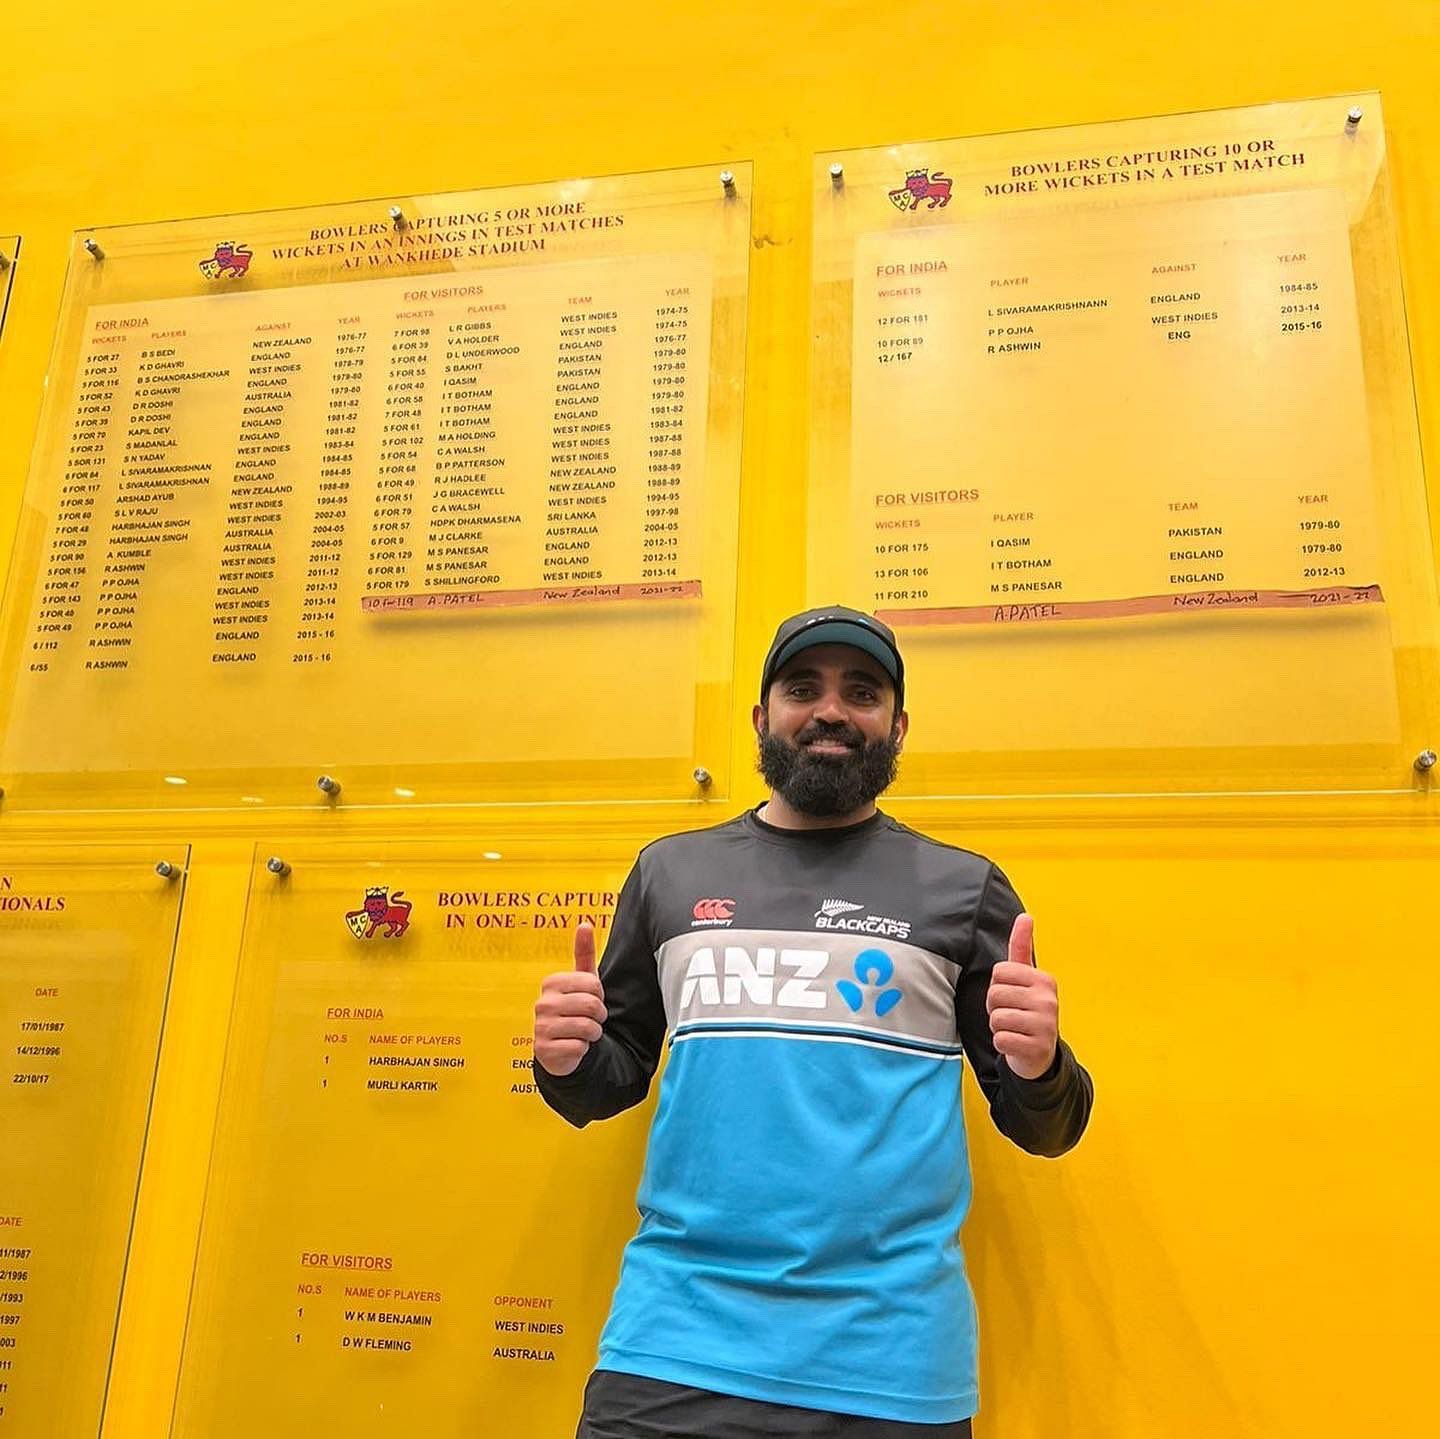 Ajaz Patel poses in front of the Honours Boards at the Wankhede Stadium [Credits: NZC]